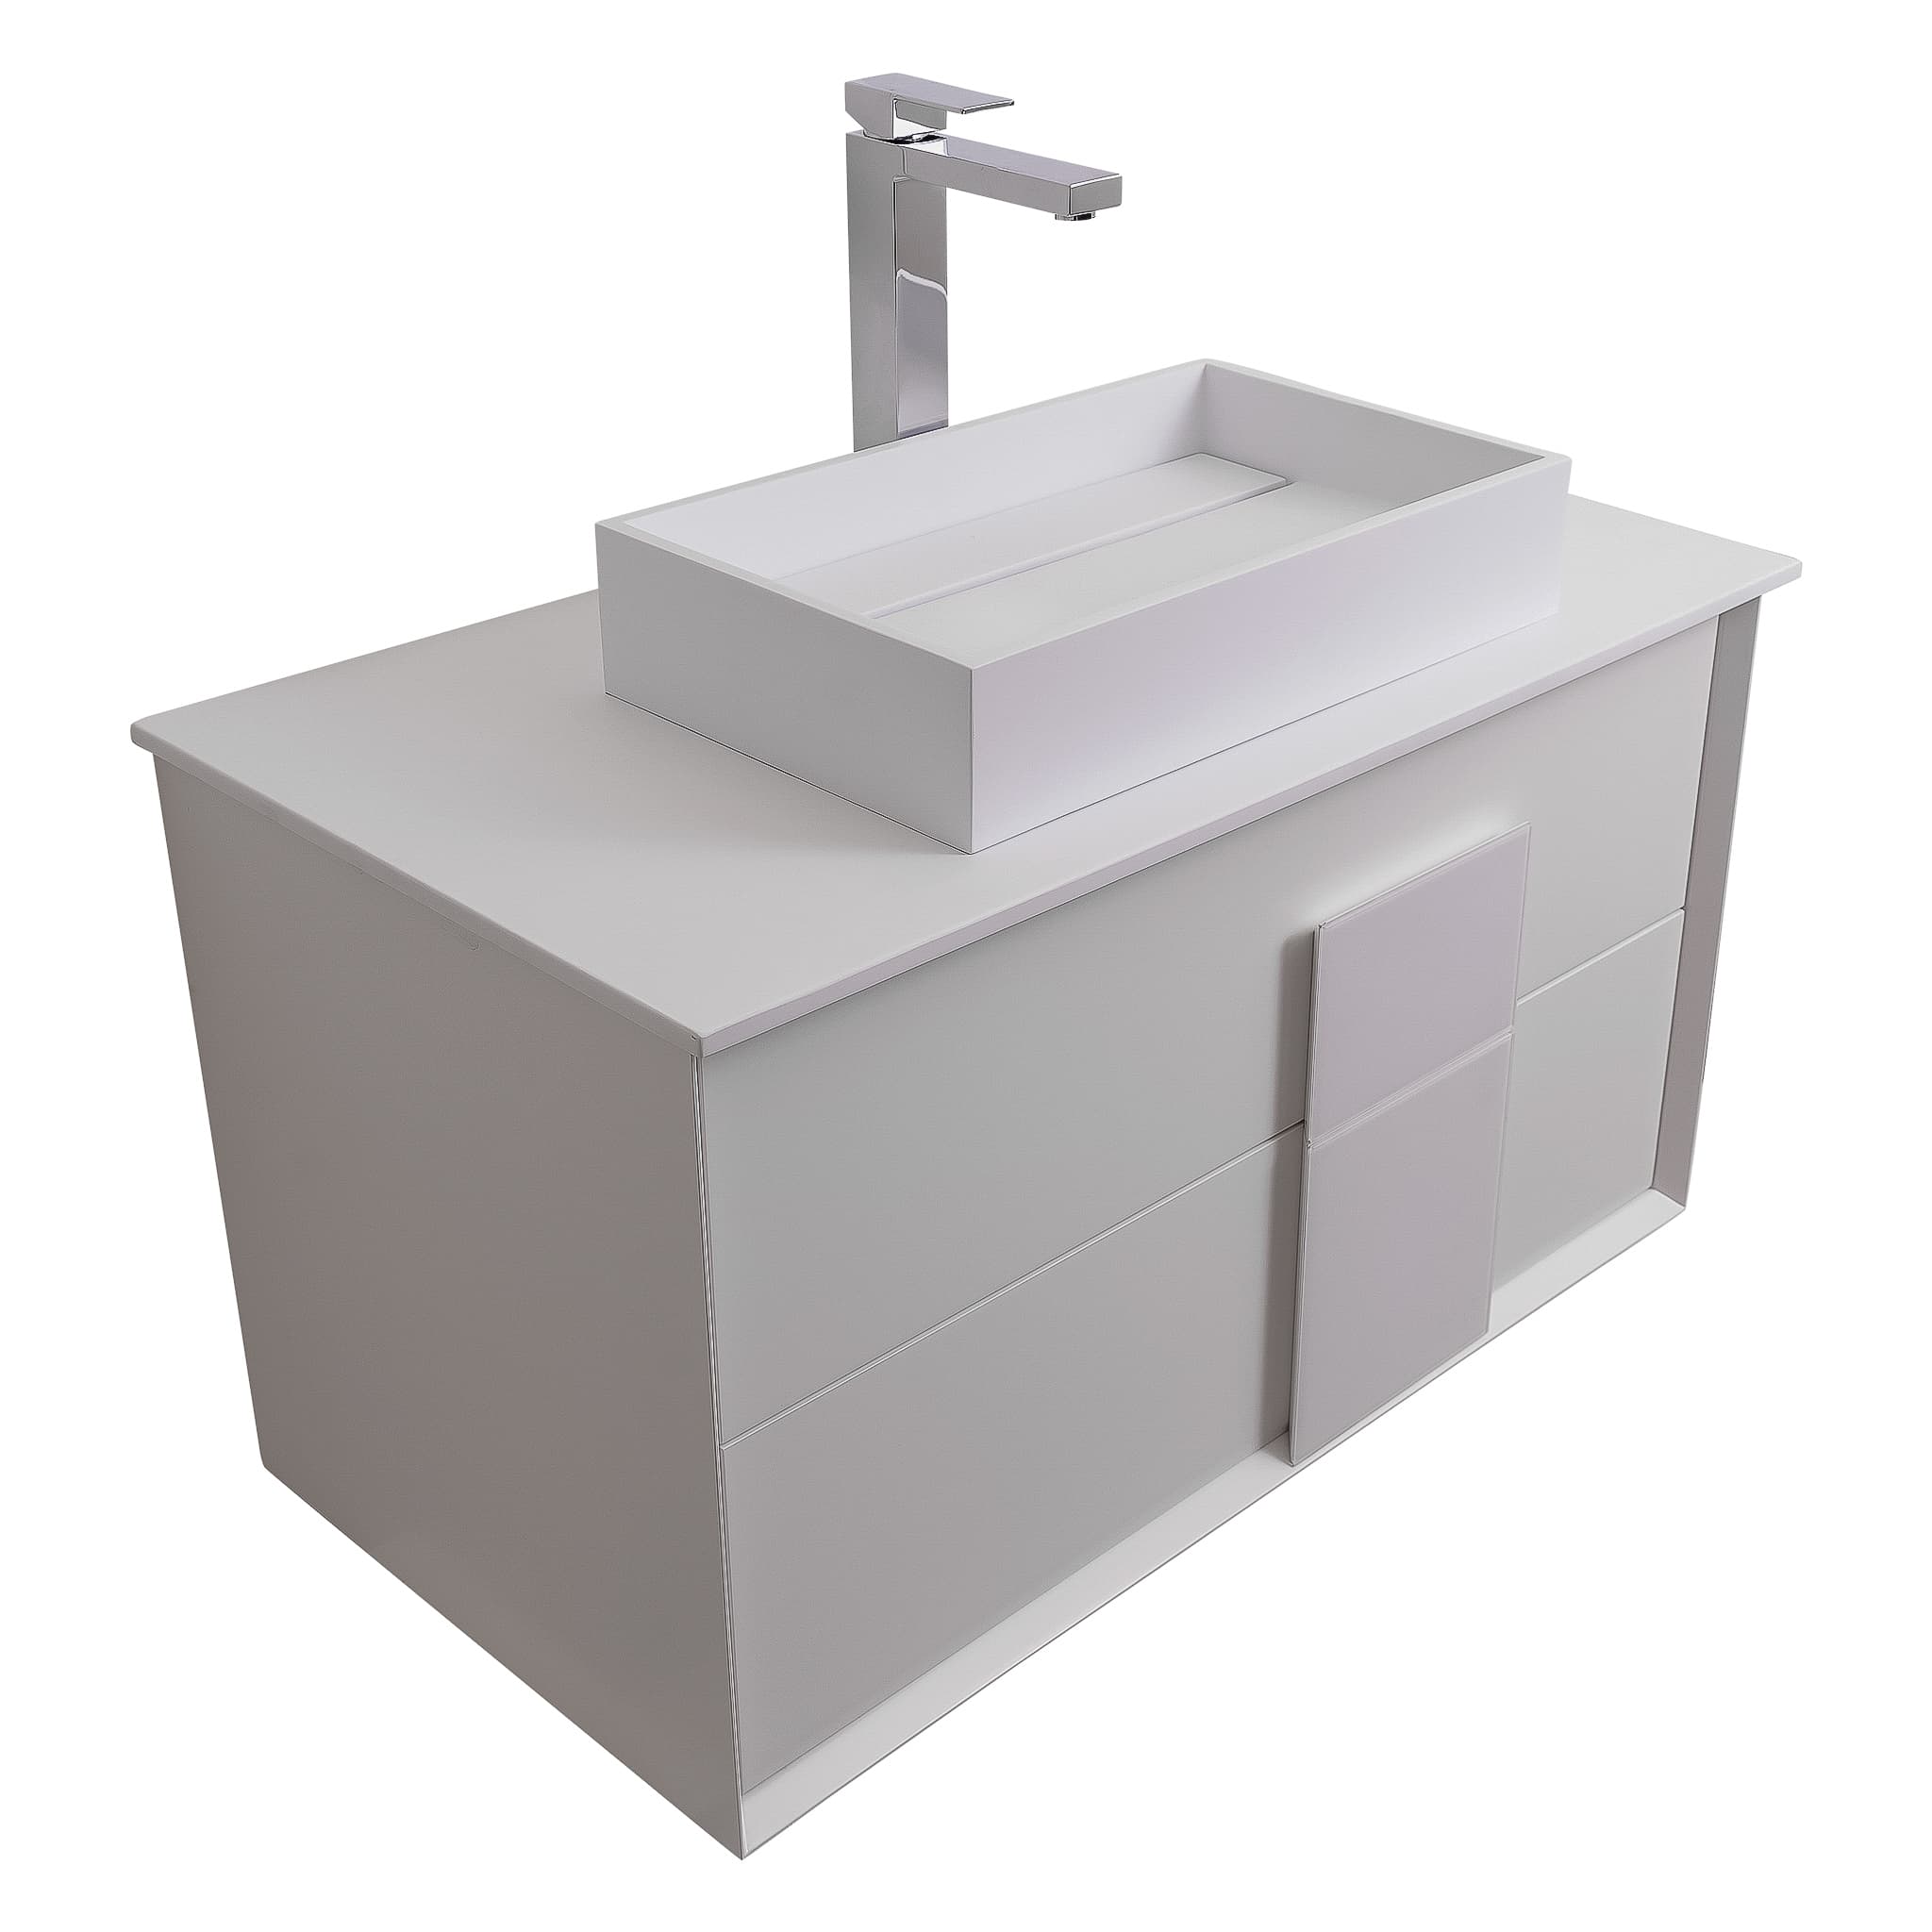 Piazza 31.5 Matte White With White Handle Cabinet, Solid Surface Flat White Counter and Infinity Square Solid Surface White Basin 1329, Wall Mounted Modern Vanity Set